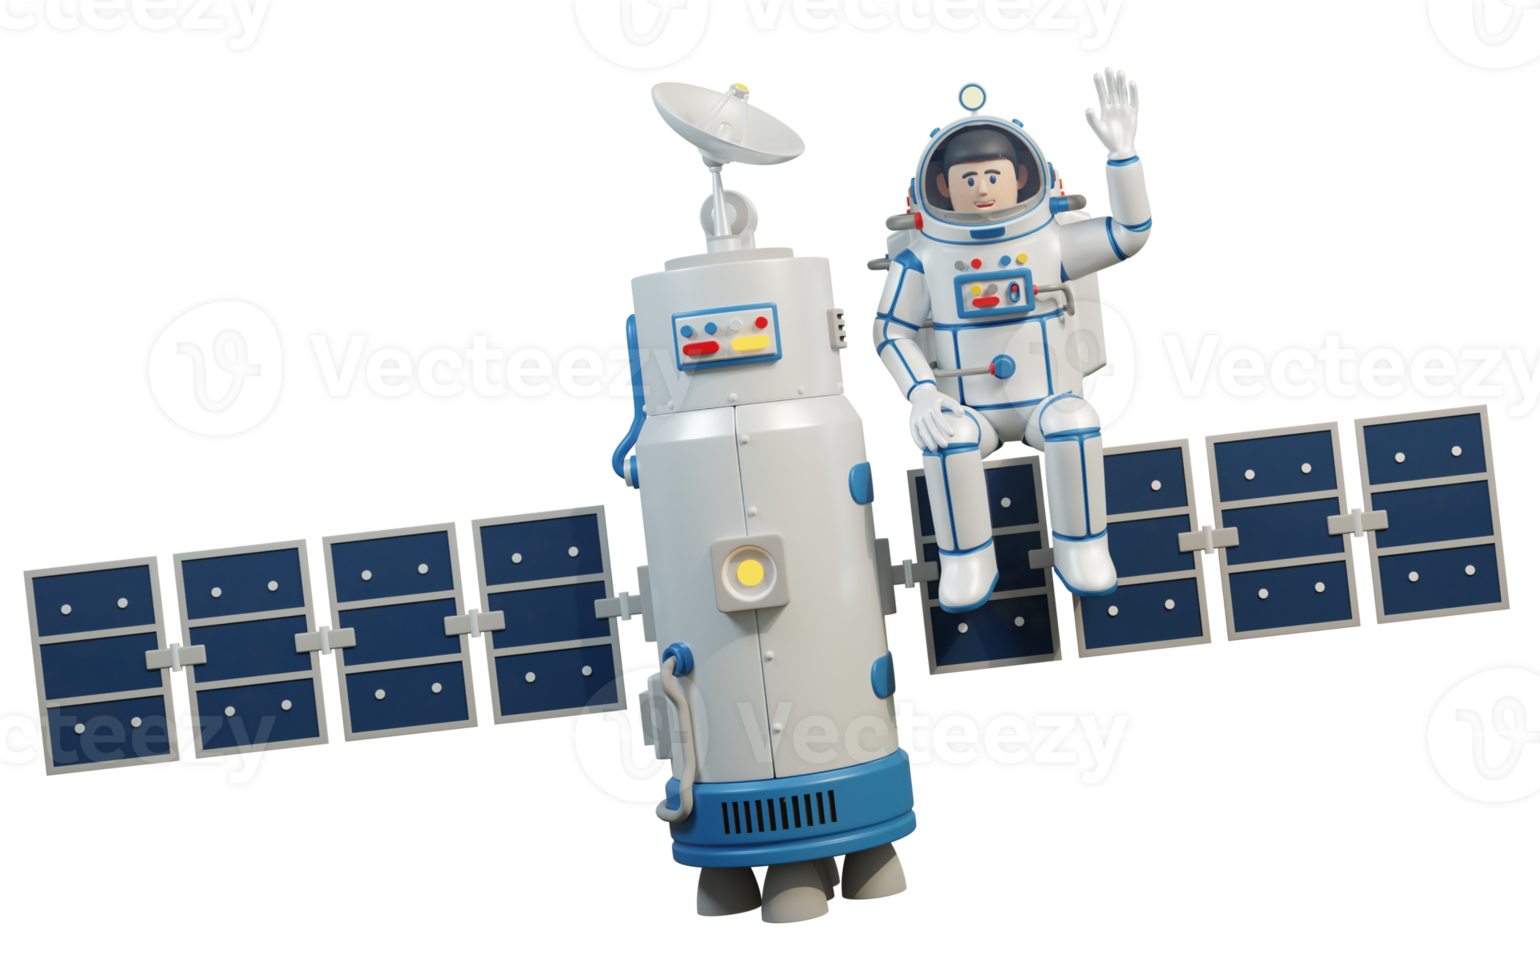 Astronaut in spacesuit sits on space satellite. Space satellite and spaceman. 3d illustration, 3d render png